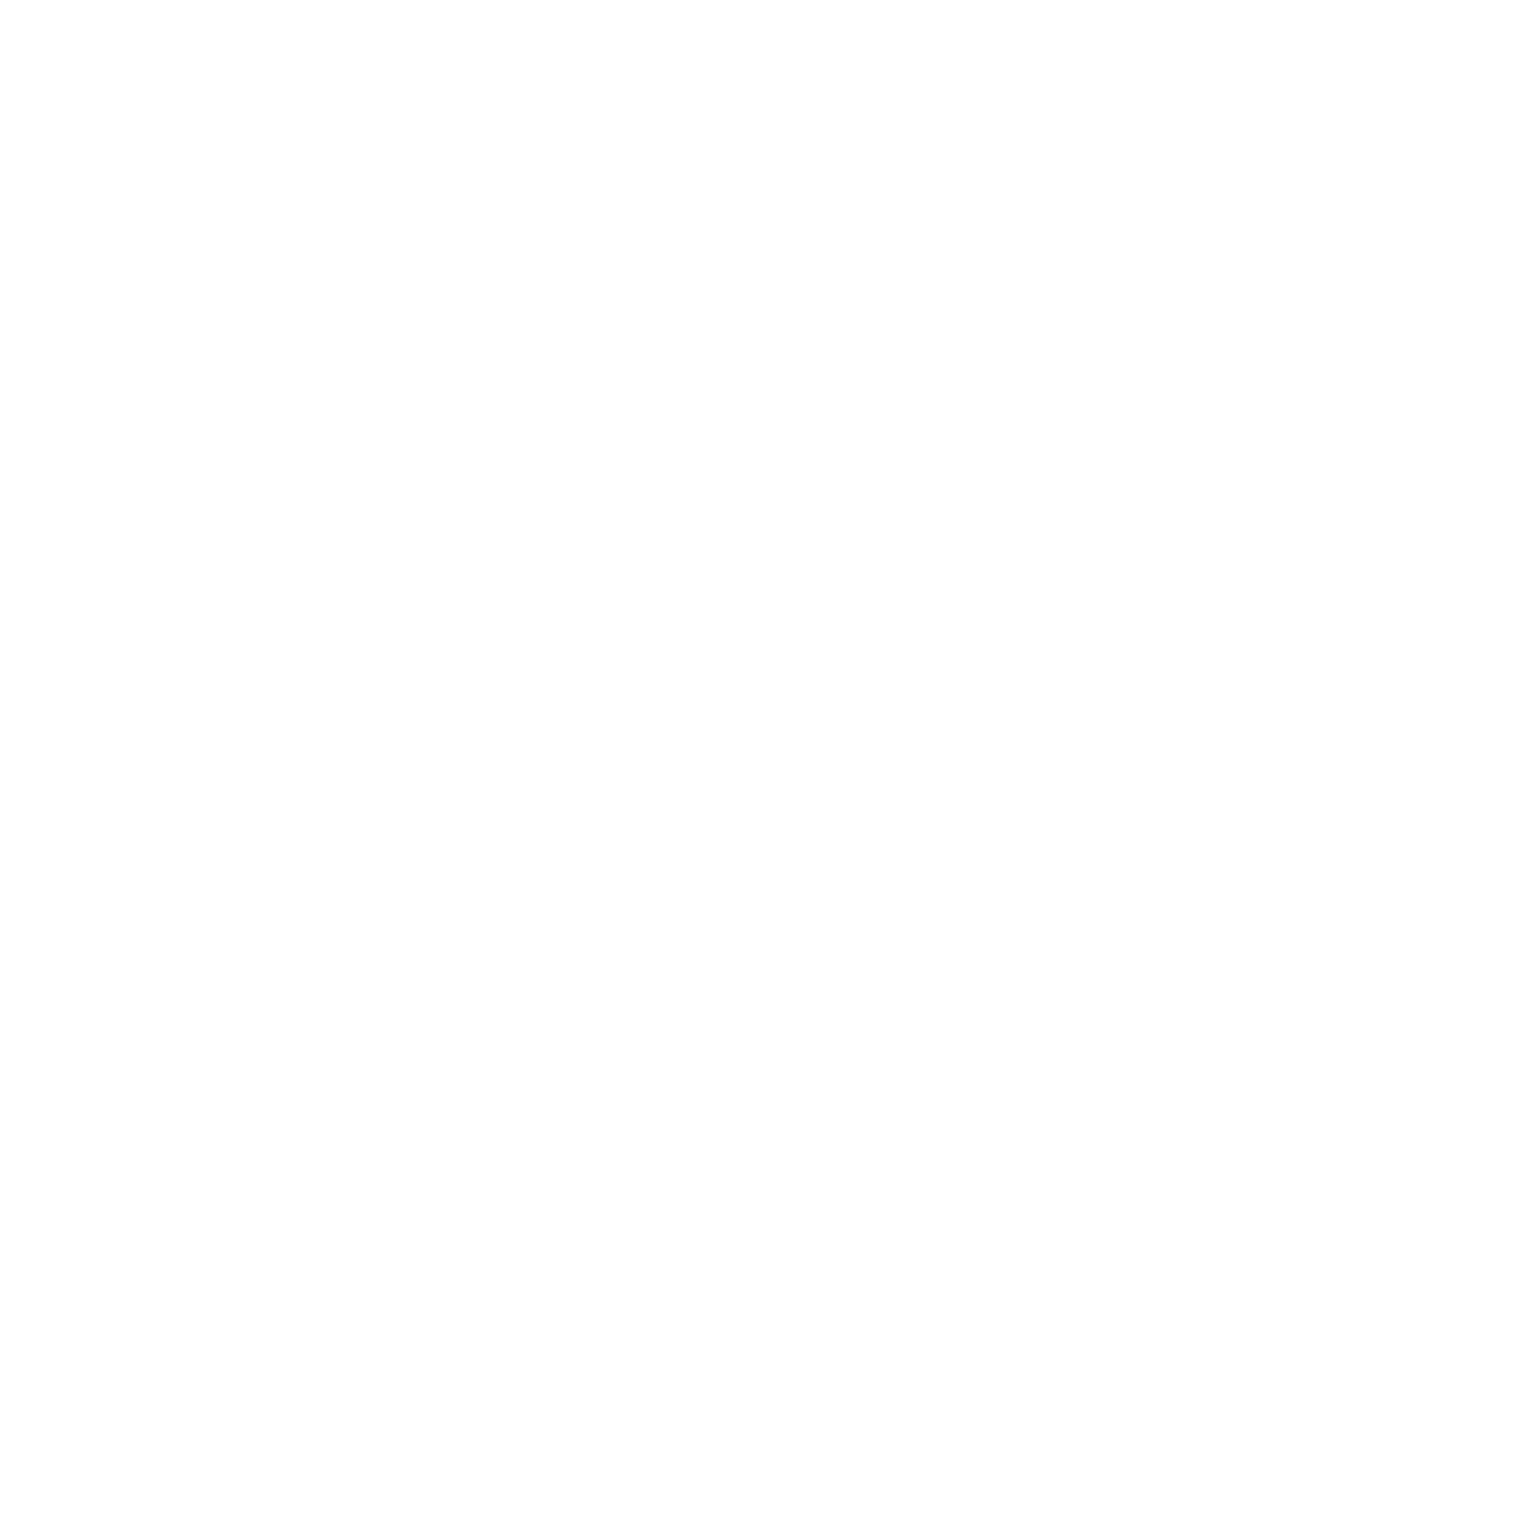 Cambium Networks logo for dark backgrounds (transparent PNG)